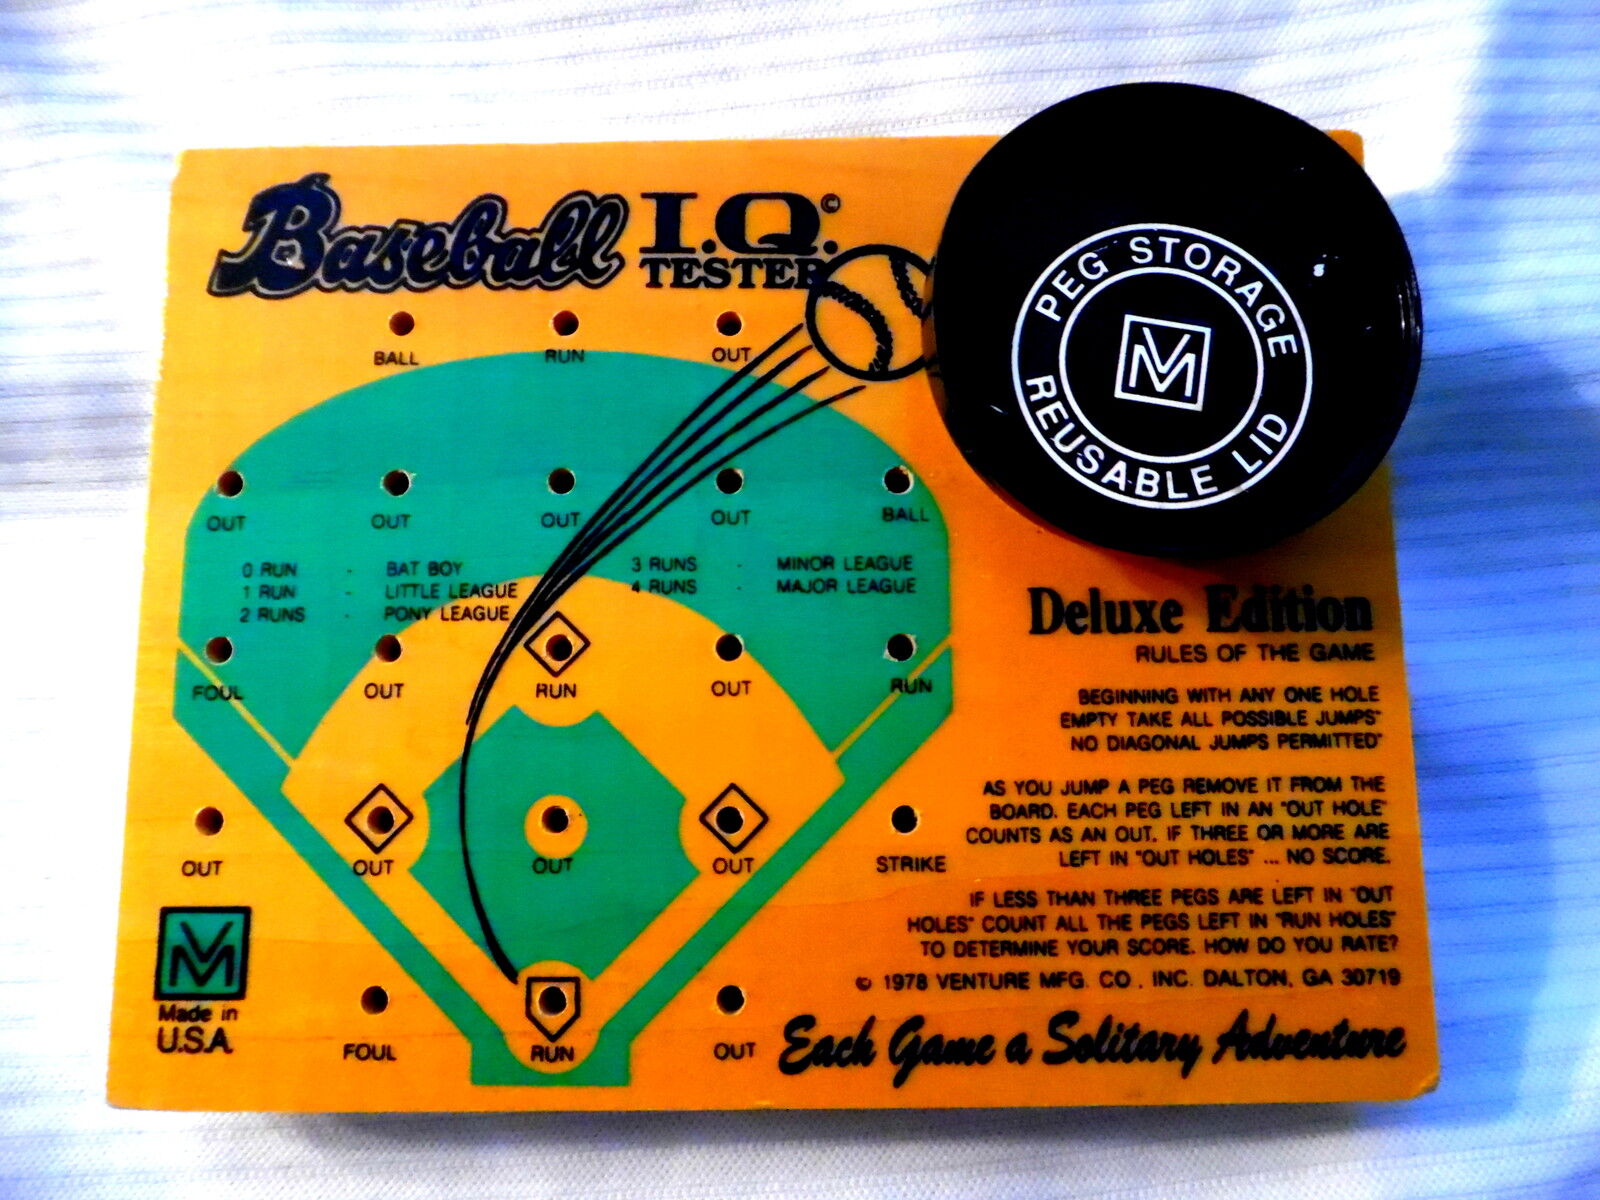 Vintage Baseball IQ Tester GAME Peg Wooden Board Game By Venture 1978 COMPLETE